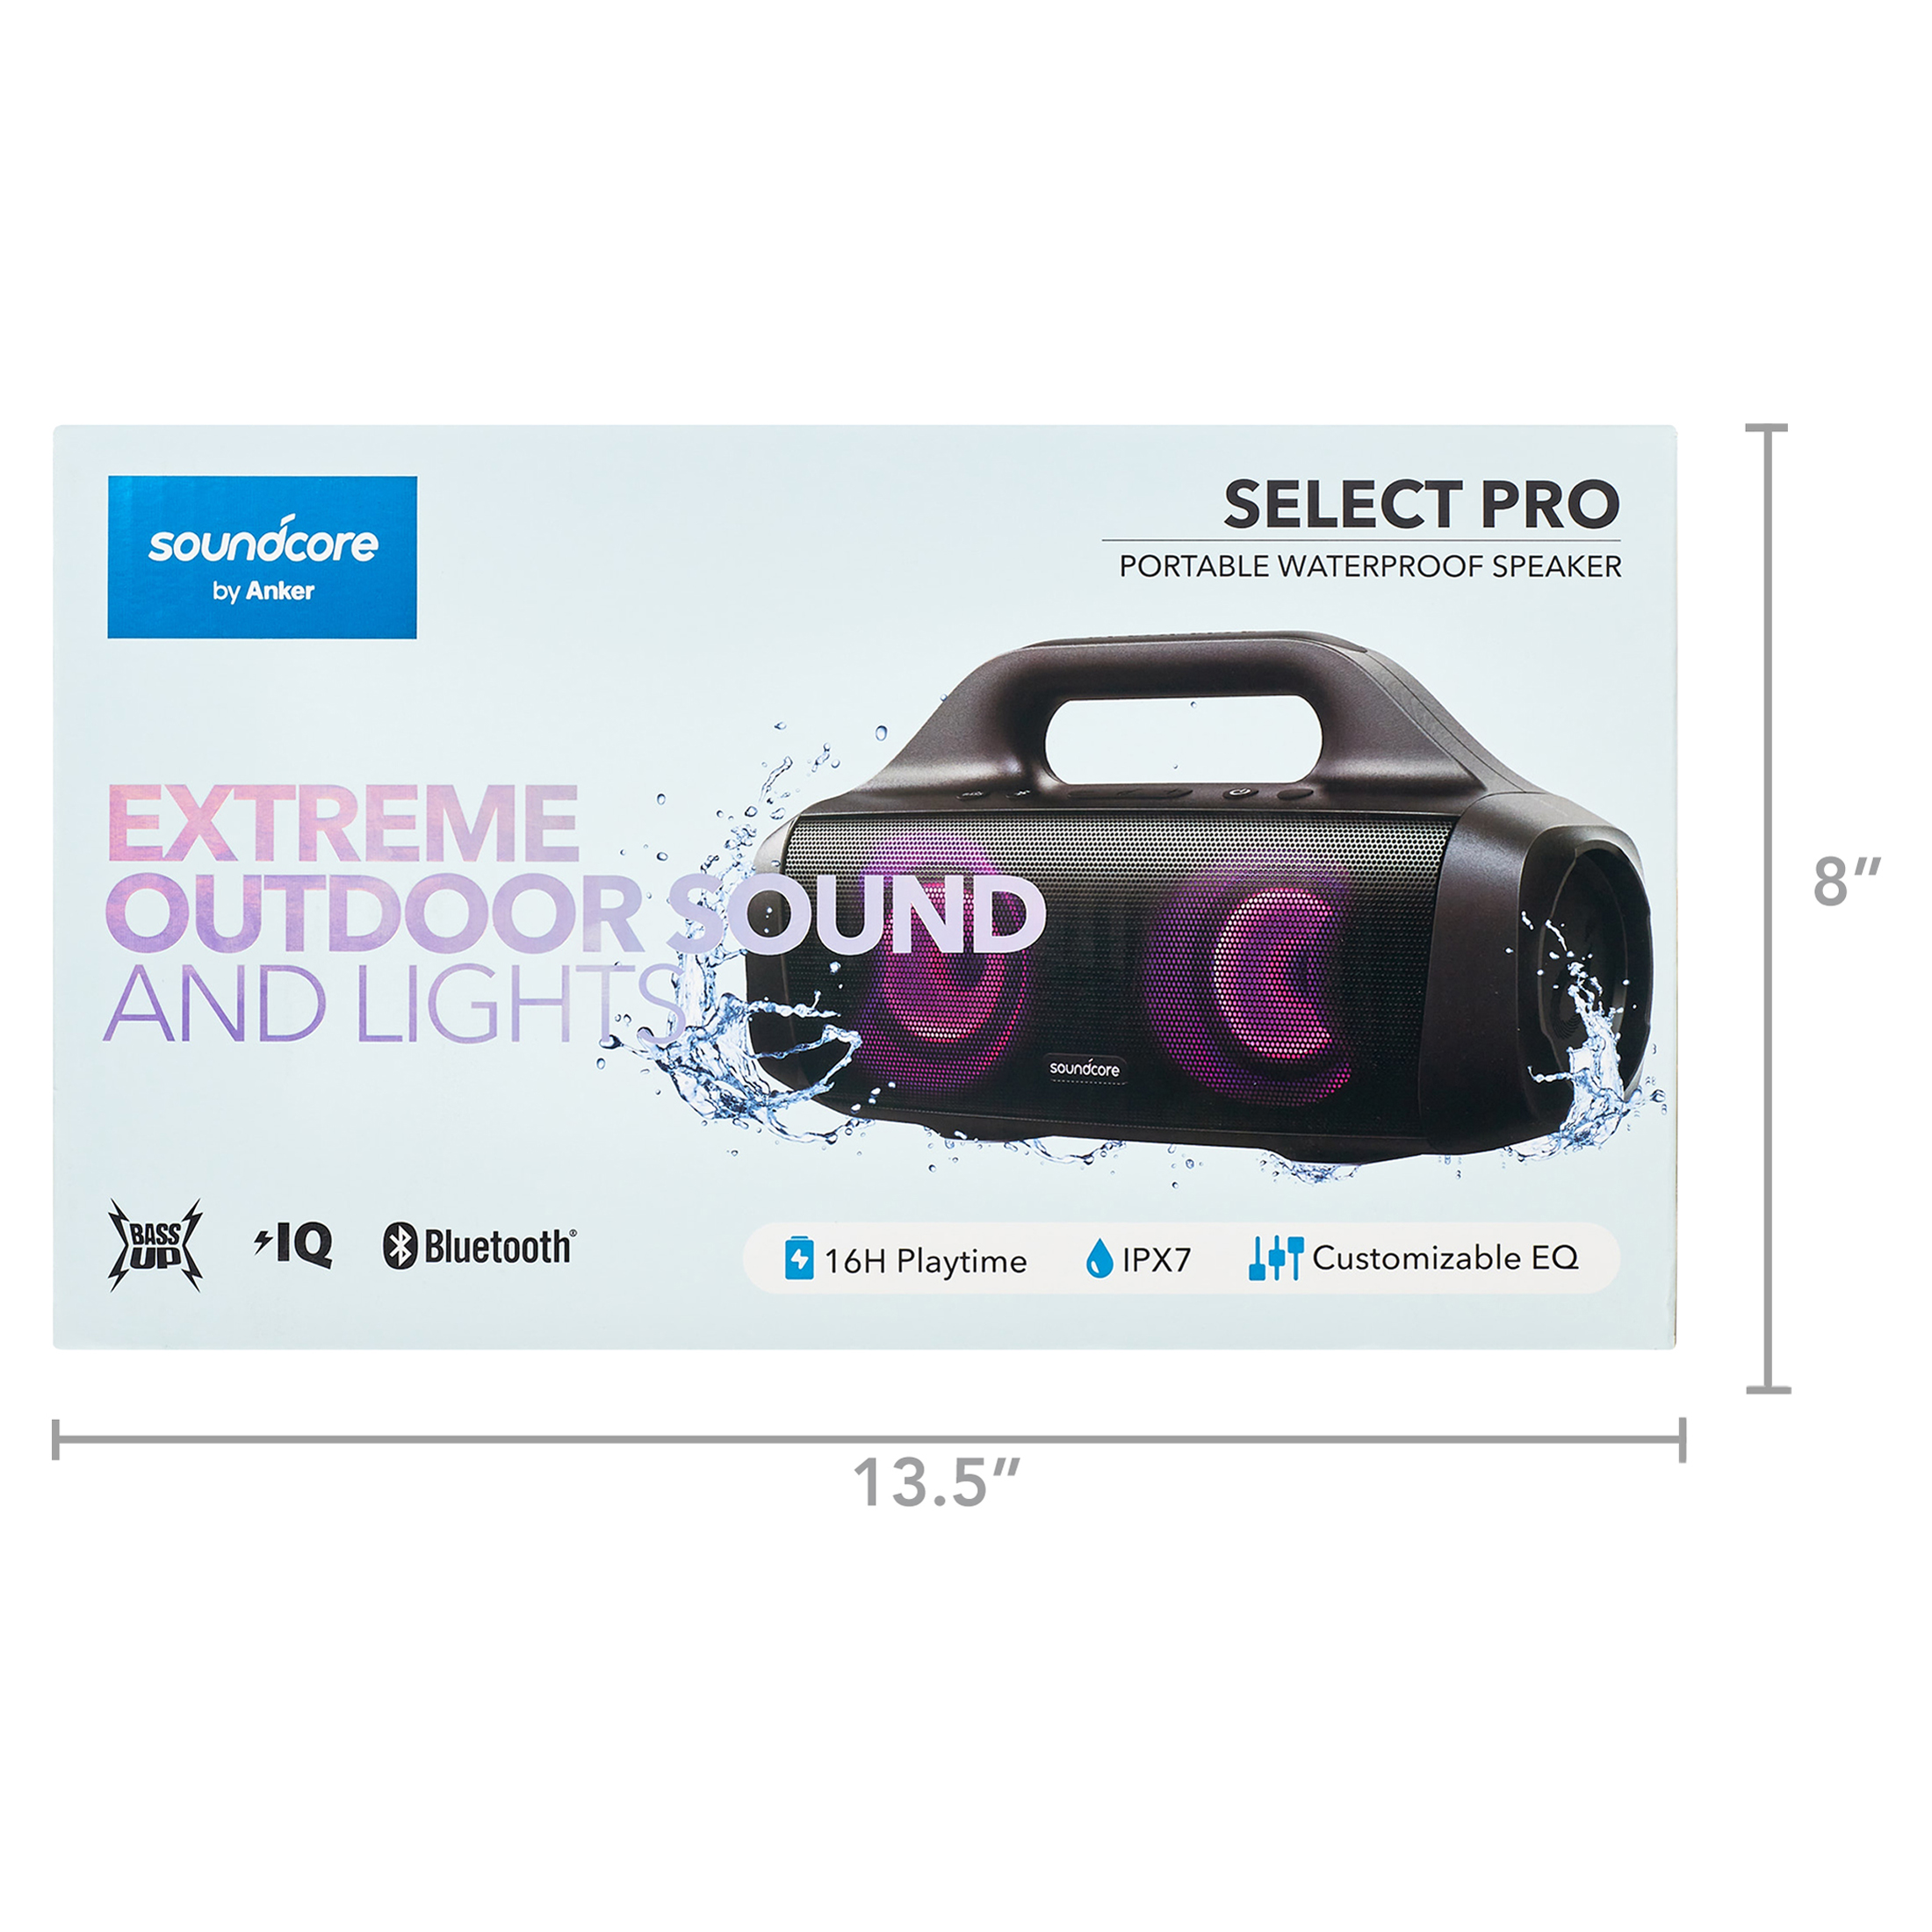 soundcore by Anker- Select Pro Portable Speaker - image 14 of 15